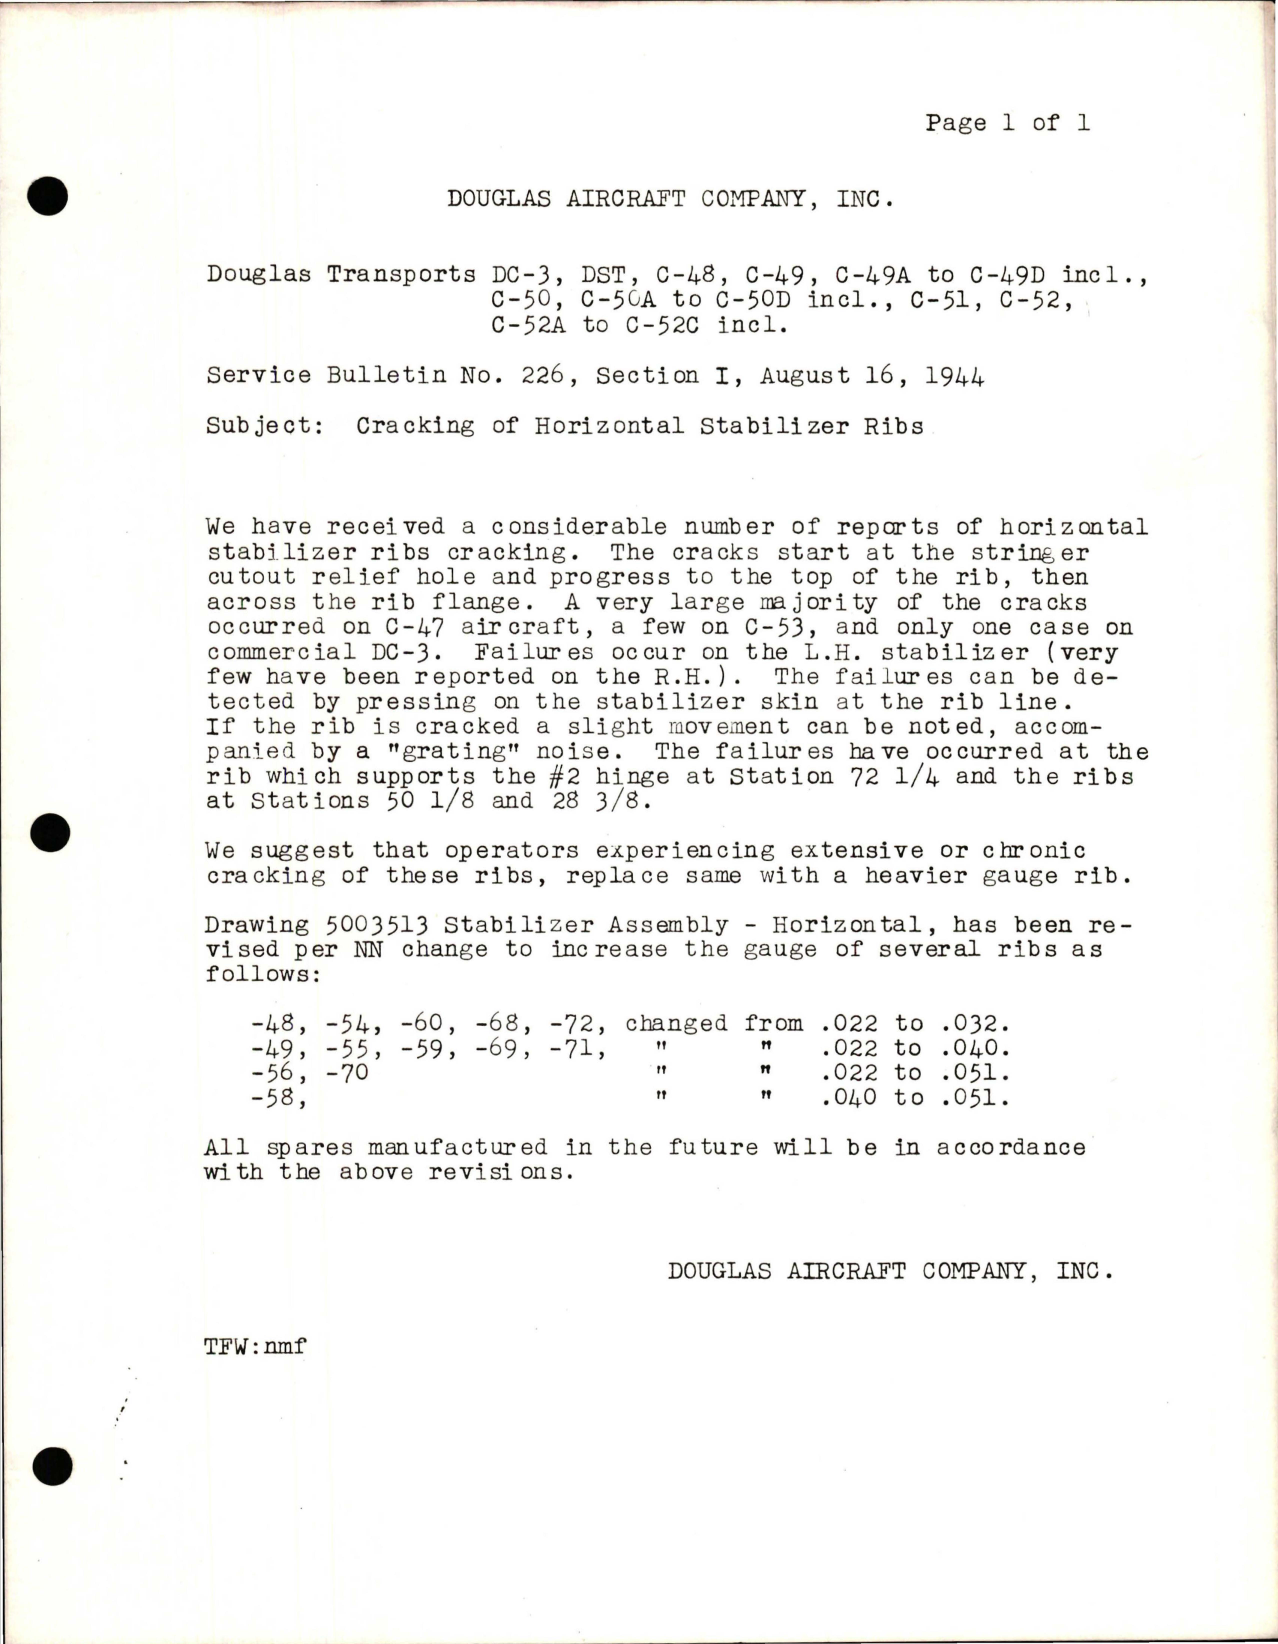 Sample page 1 from AirCorps Library document: Cracking of Horizontal Stabilizer Ribs